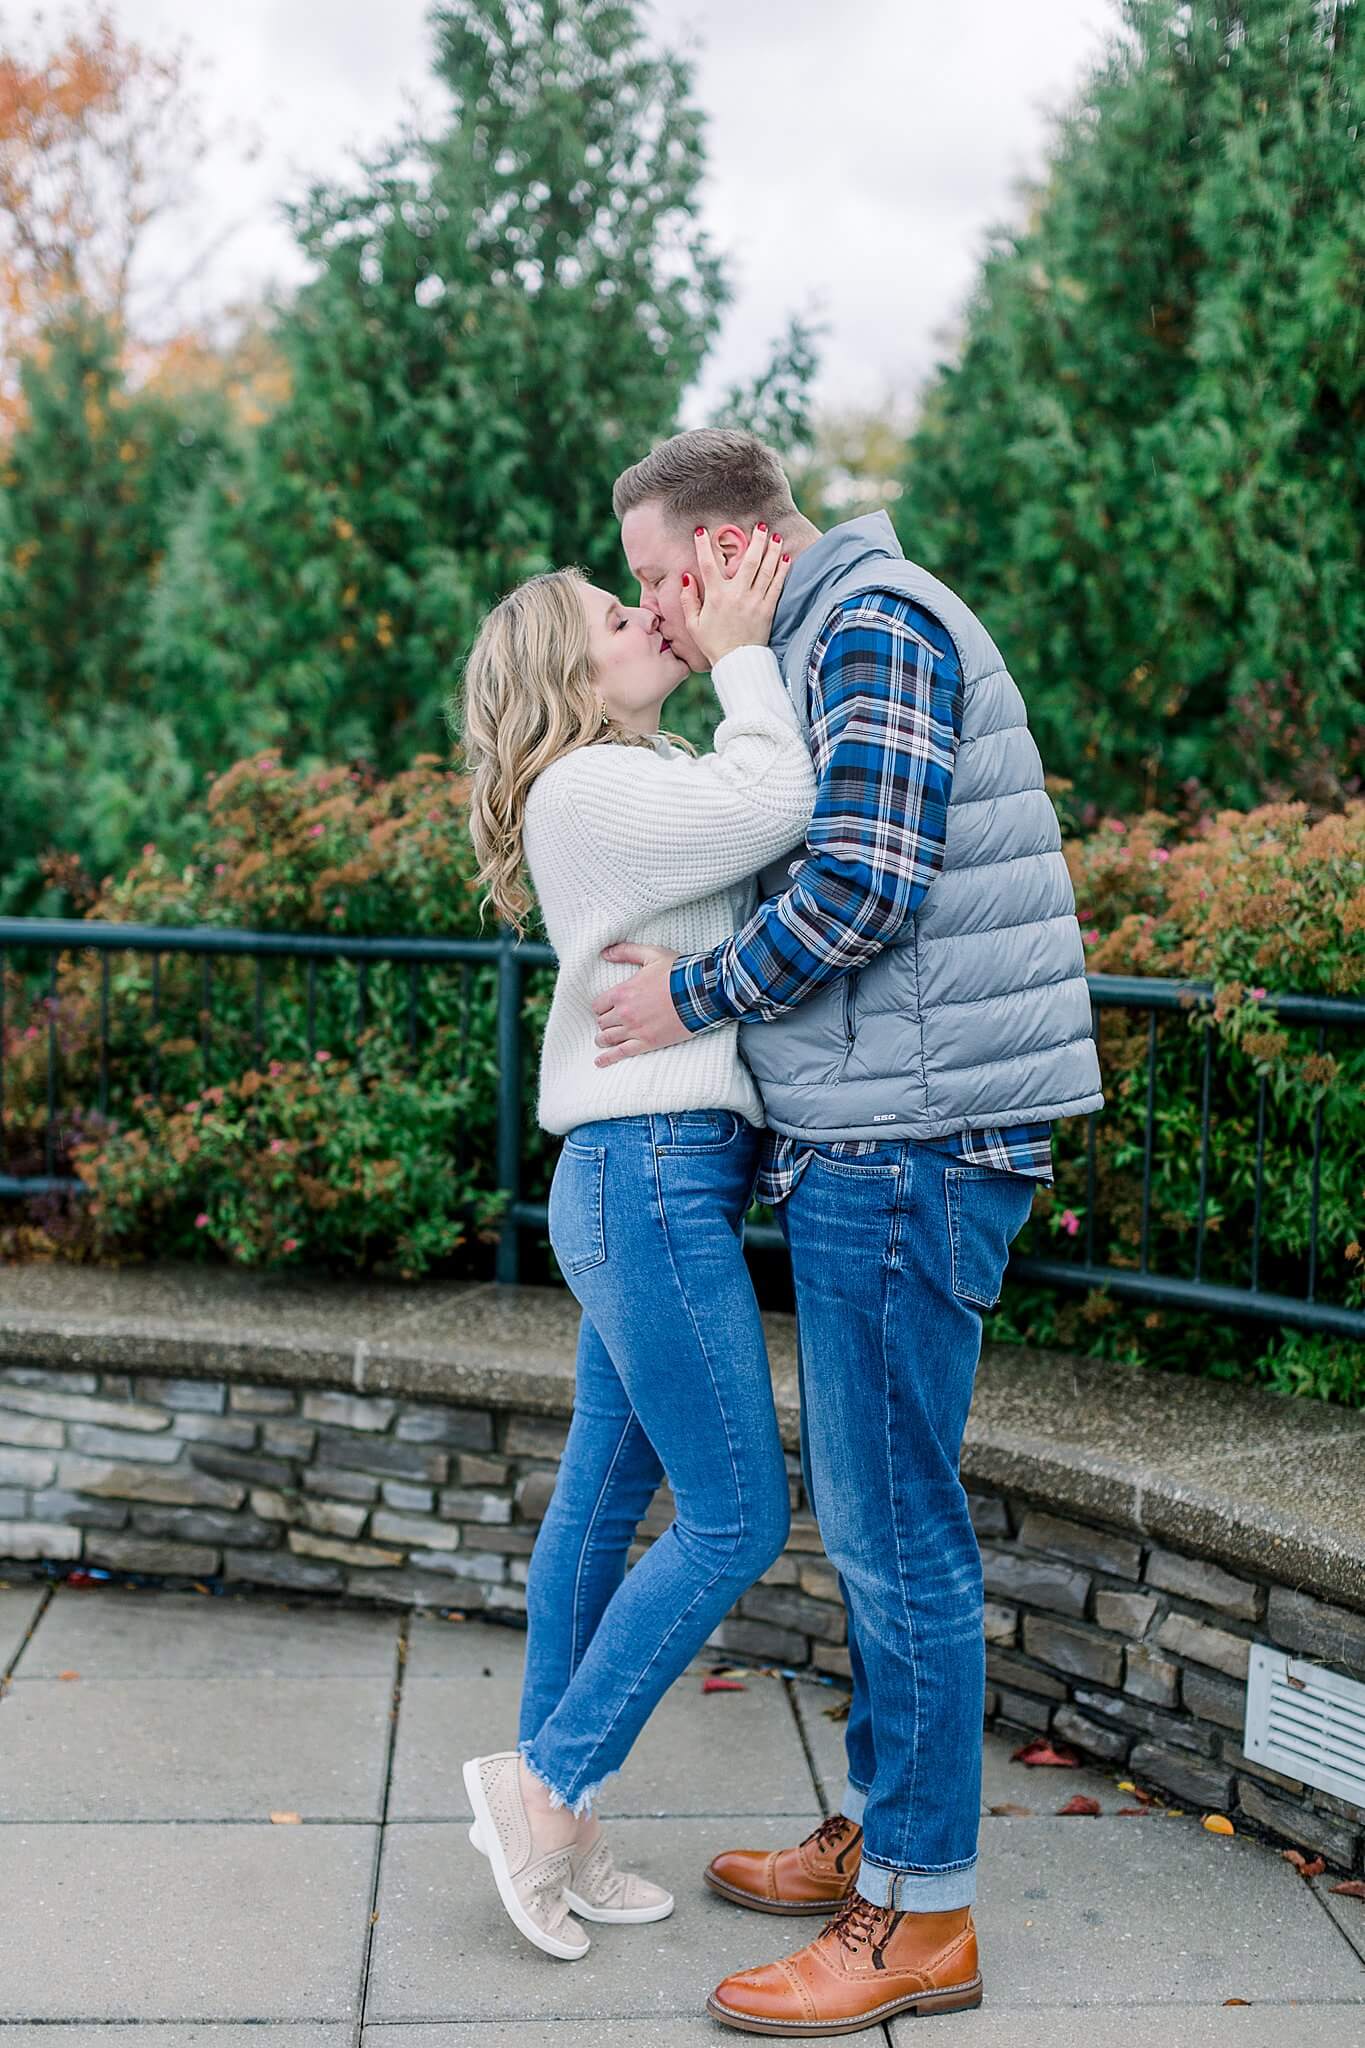 Bride kisses groom during rainy fall engagement session in Charlevoix, Michigan.